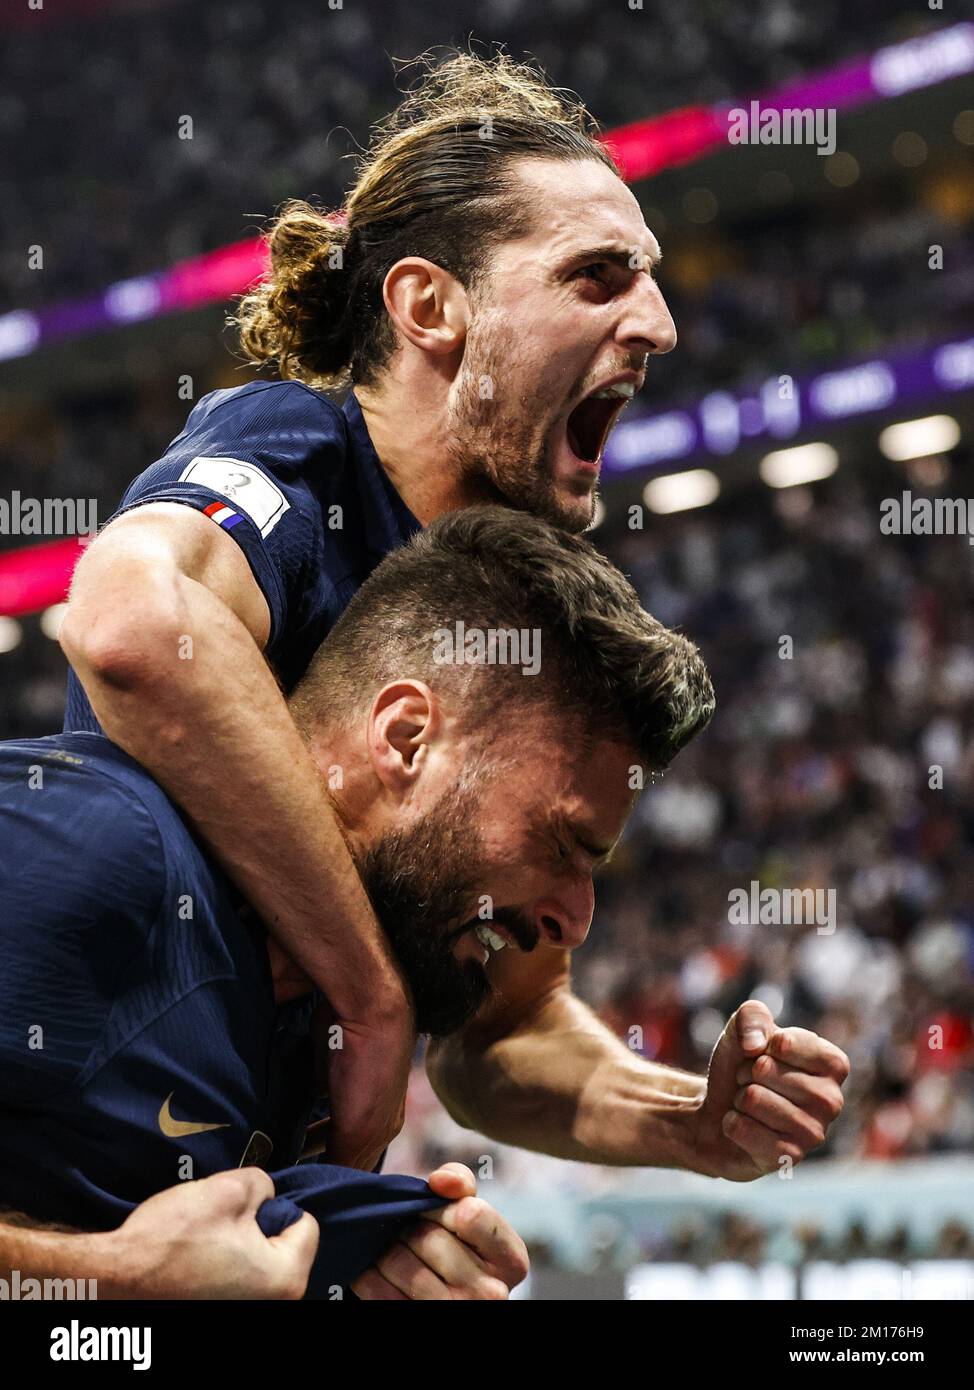 AL KHOR - Olivier Giroud of France and Adrien Rabiot of France celebrate the 1-2 draw during the FIFA World Cup Qatar 2022 quarter final match between England and France at Al Bayt Stadium on December 10, 2022 in Al Khor, Qatar. AP | Dutch Height | MAURICE OF STONE Credit: ANP/Alamy Live News Stock Photo